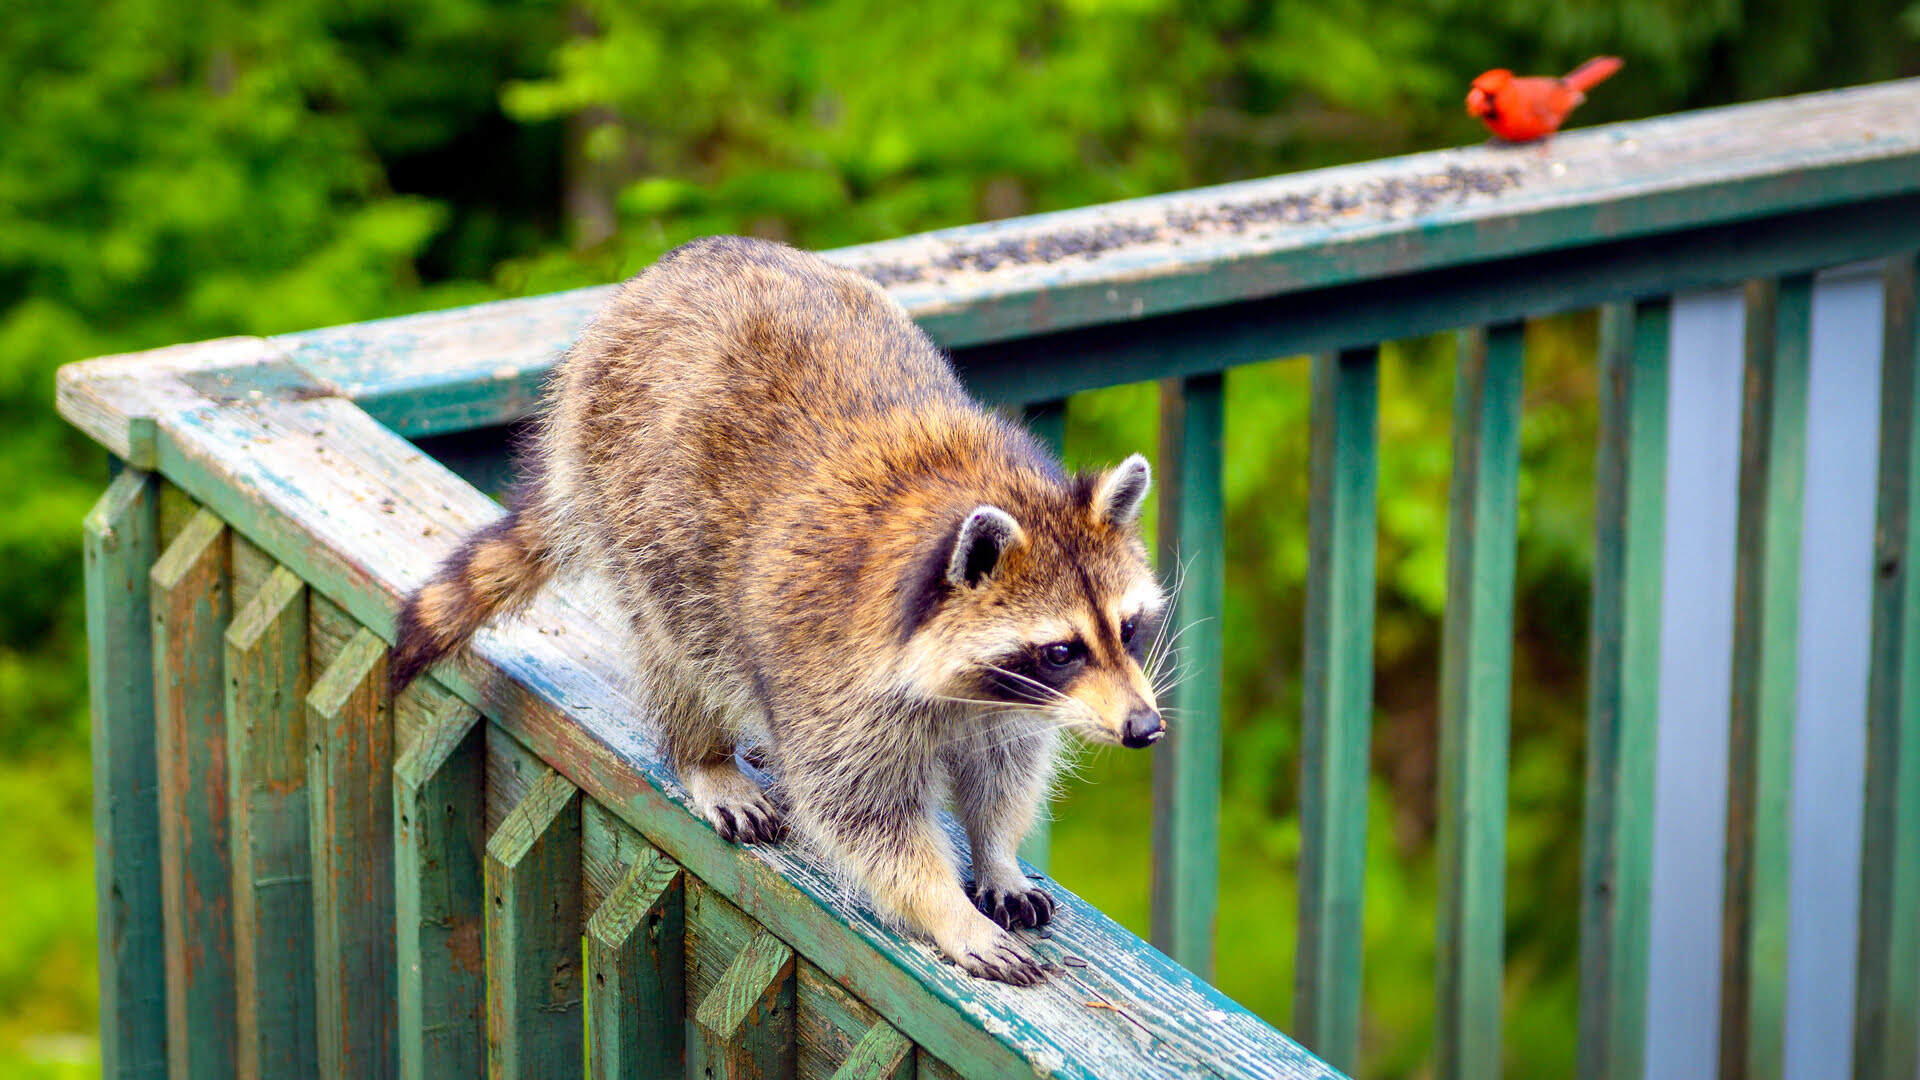 How Do I Keep Raccoons Off My Porch